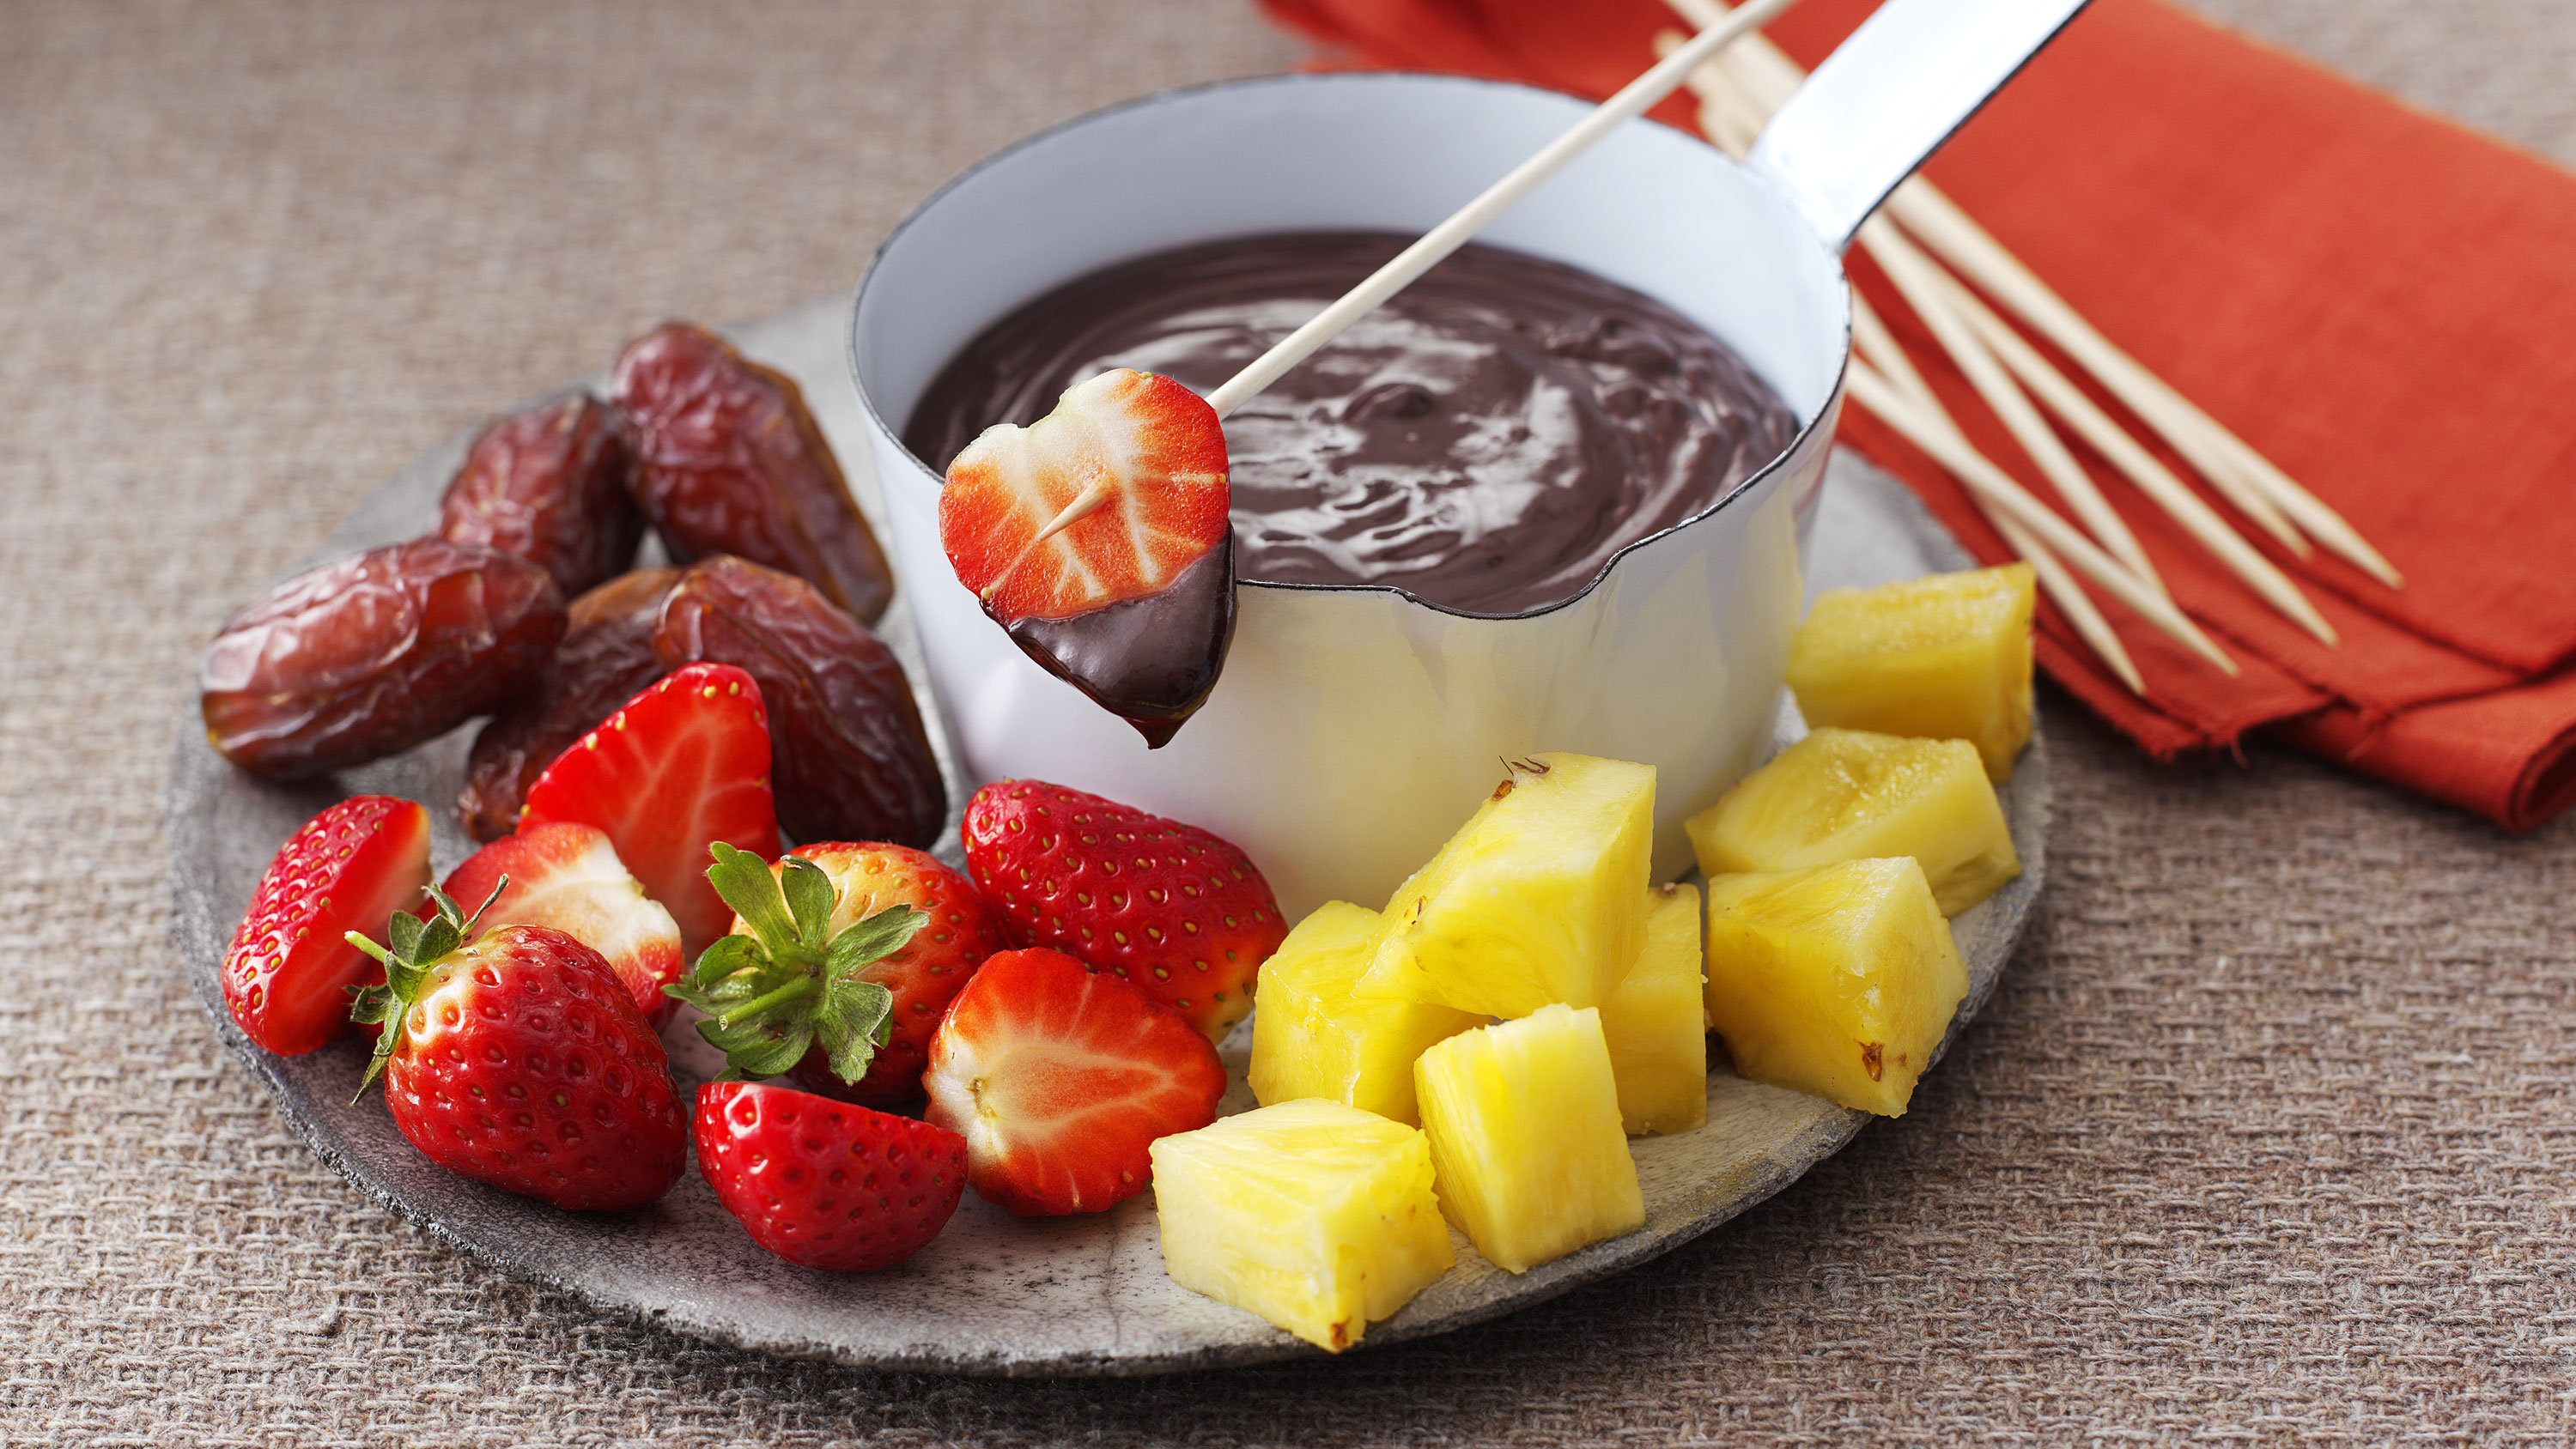 Recipe by chocolate for fondue